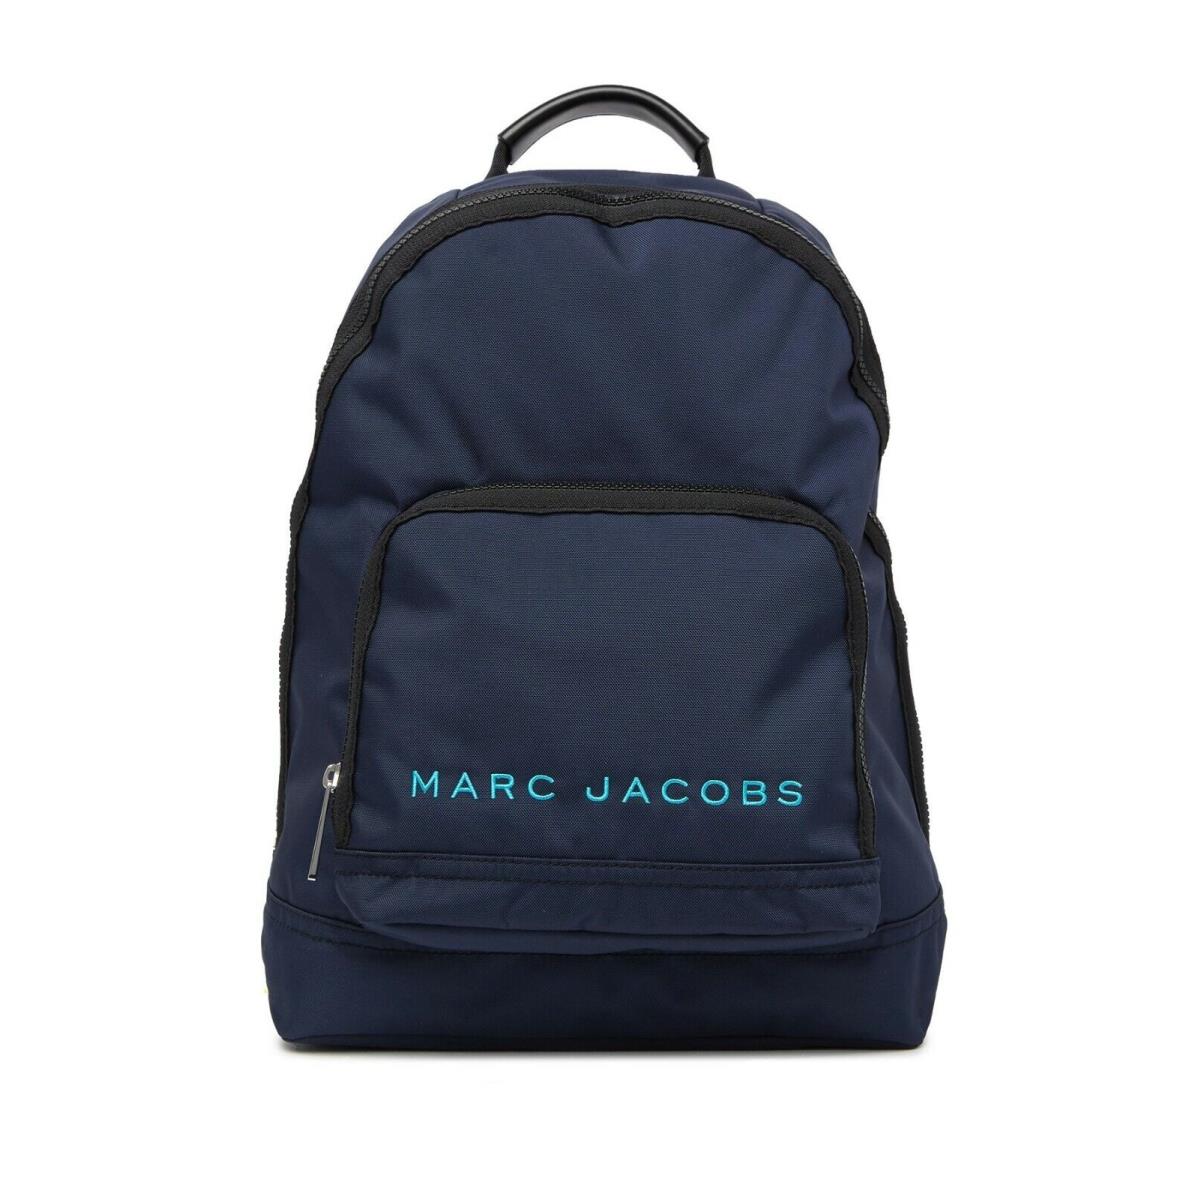 Marc Jacobs All Star Backpack Indigo